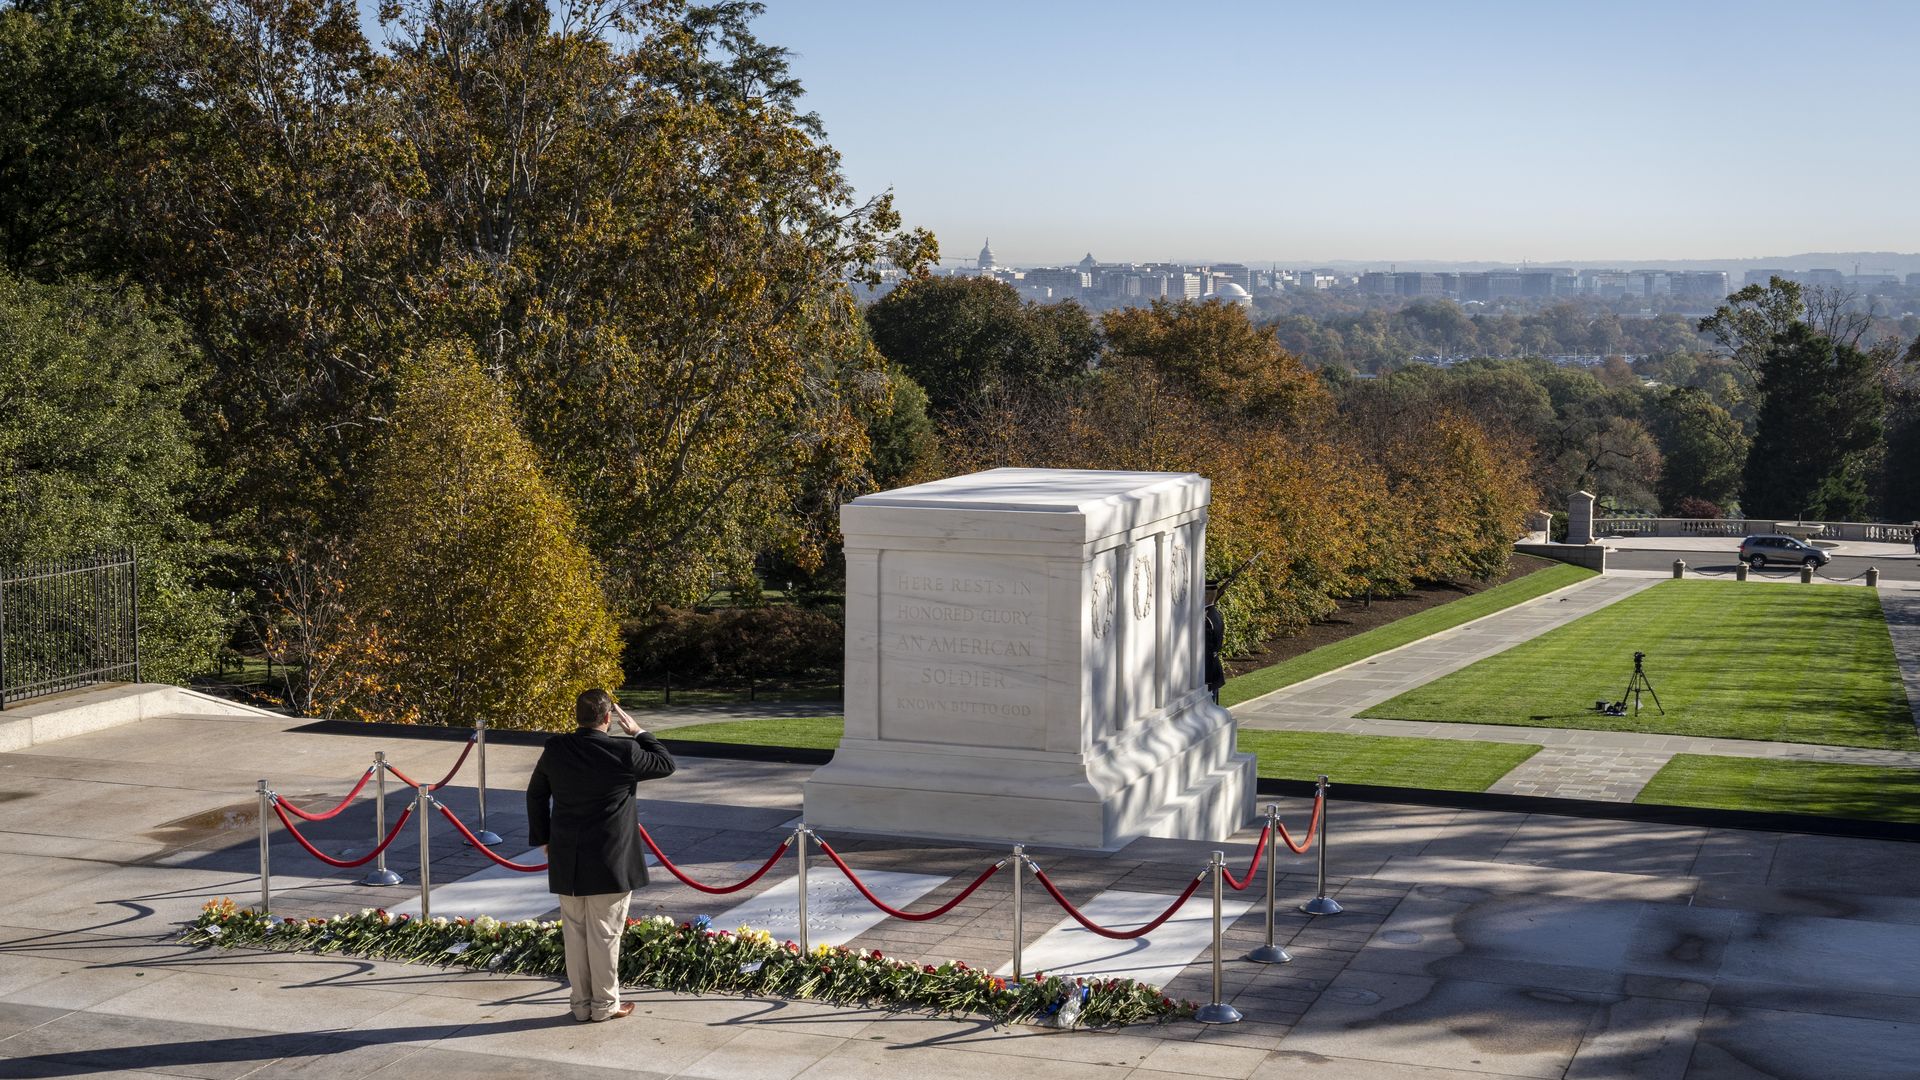 A man is seen saluting at the Tomb of the Unknown Soldier.